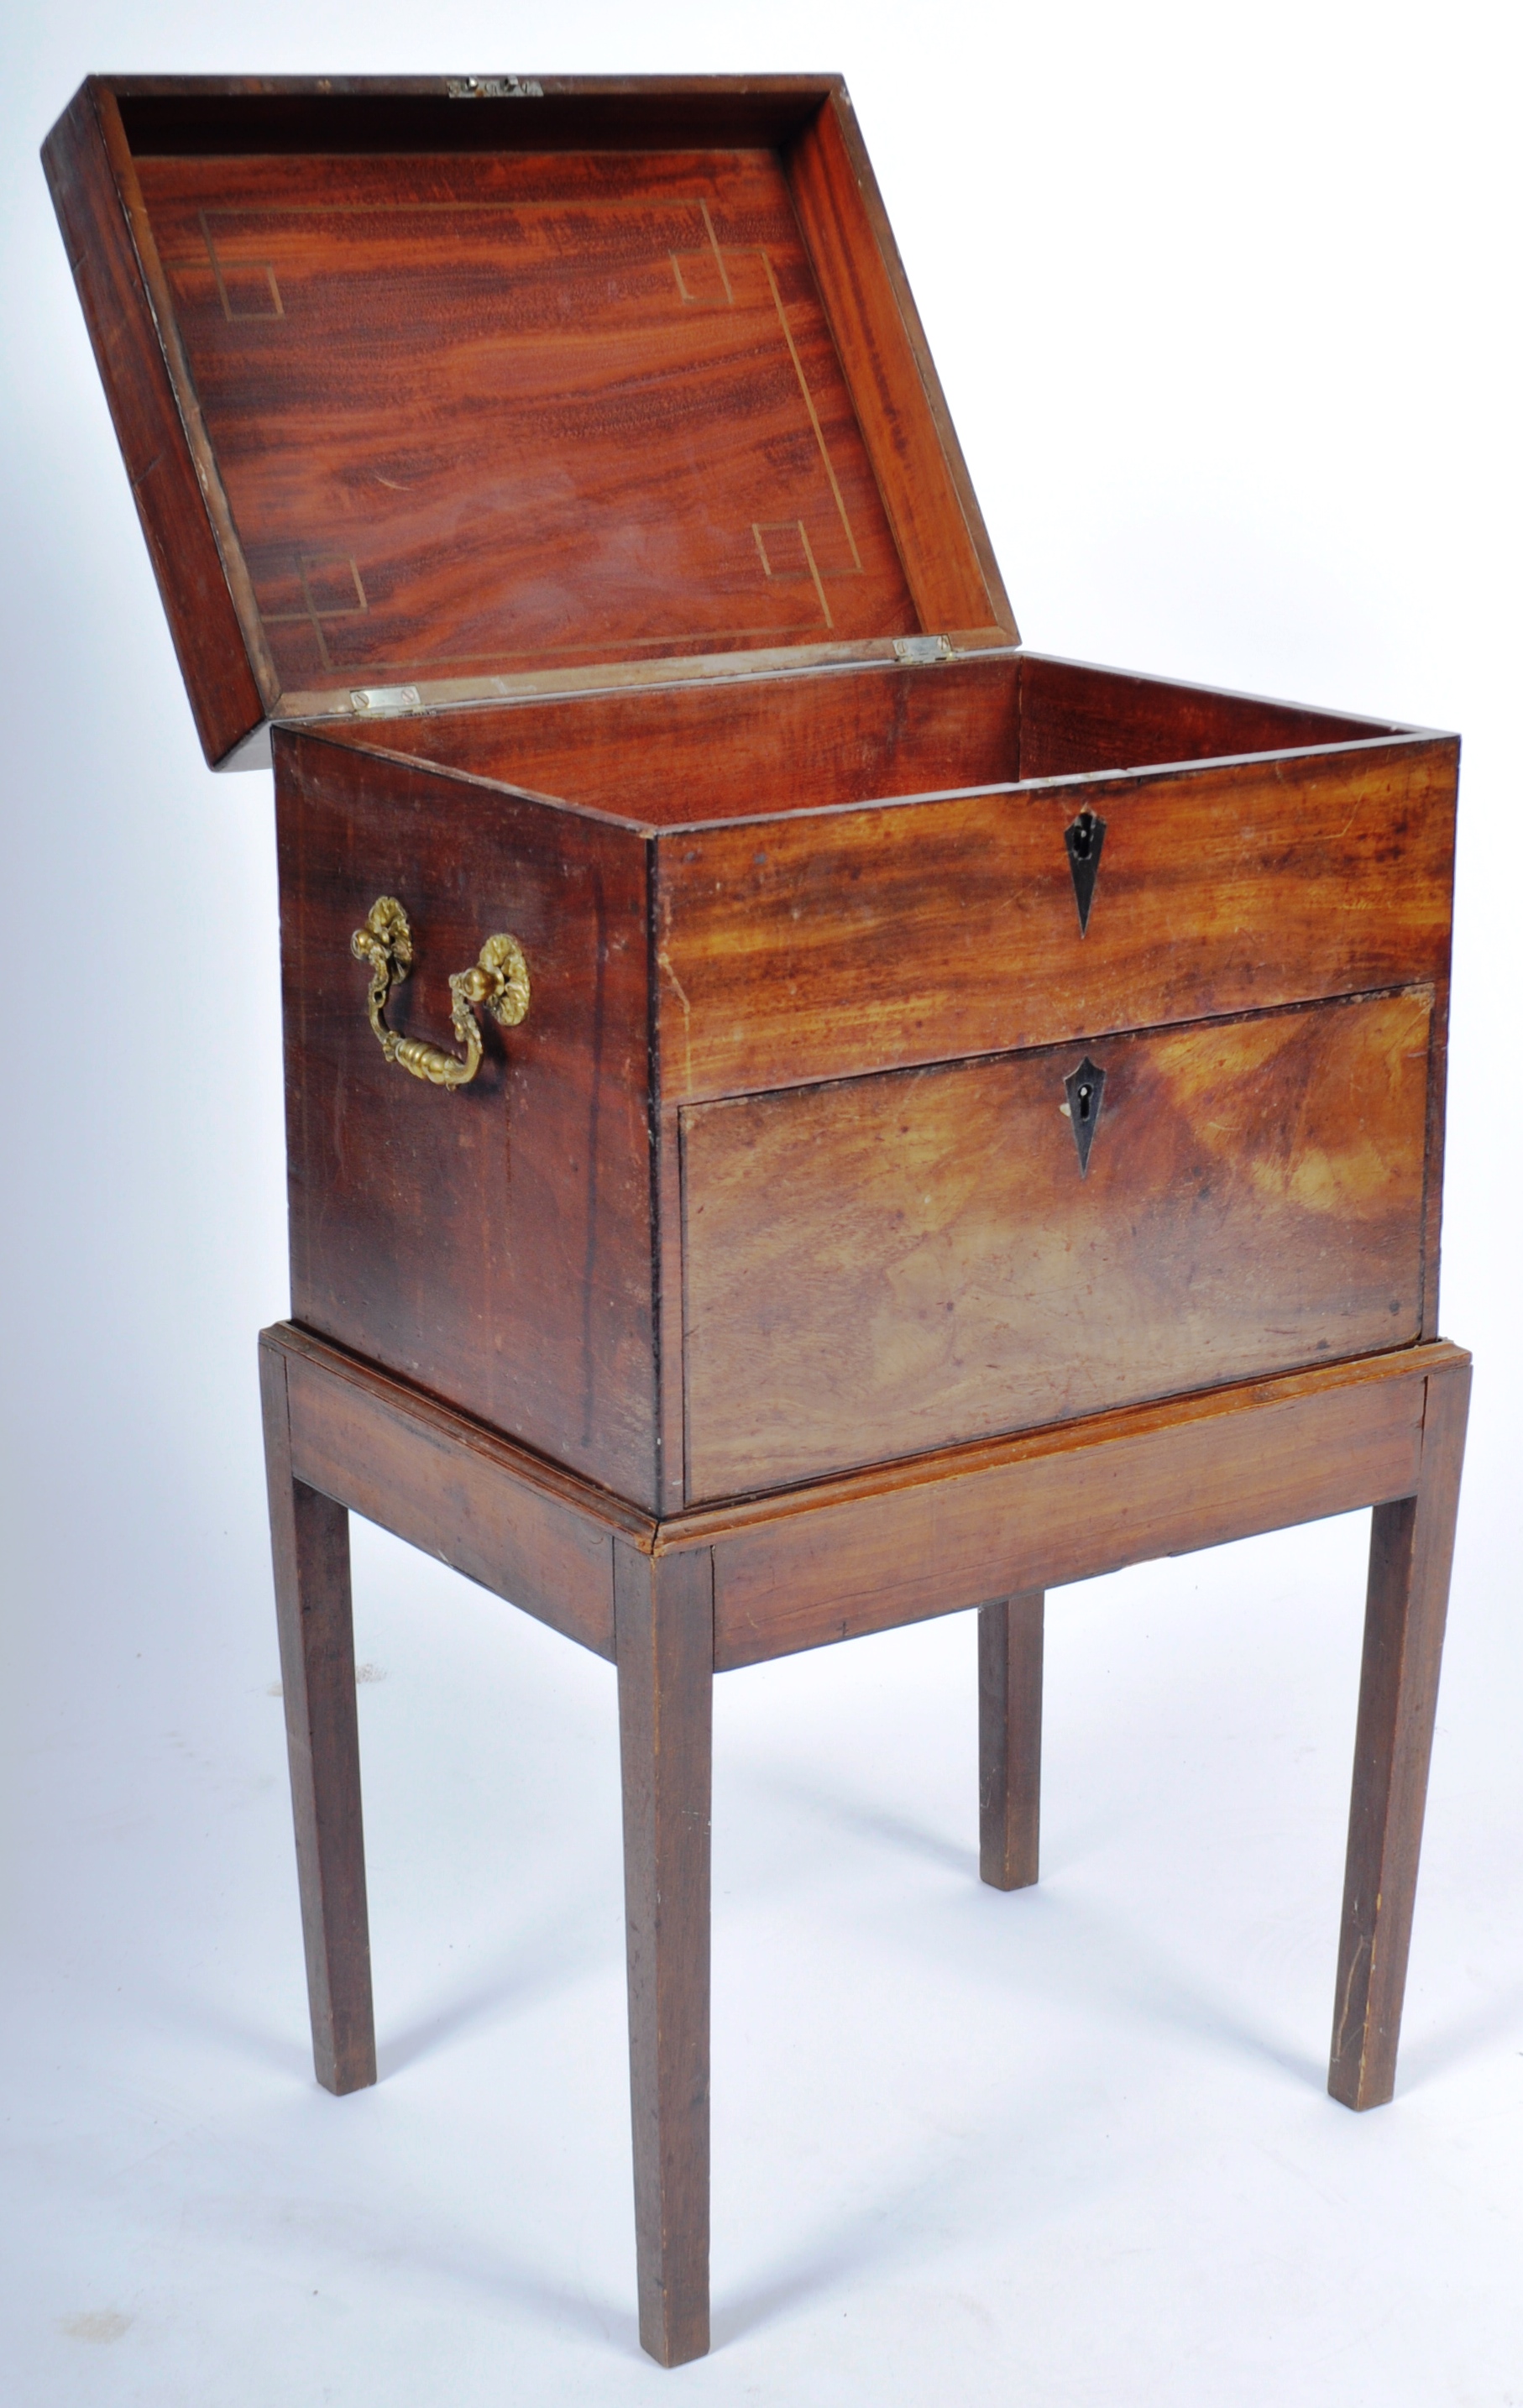 EARLY 19TH CENTURY REGENCY MAHOGANY WORK BOX ON STAND - Image 3 of 5